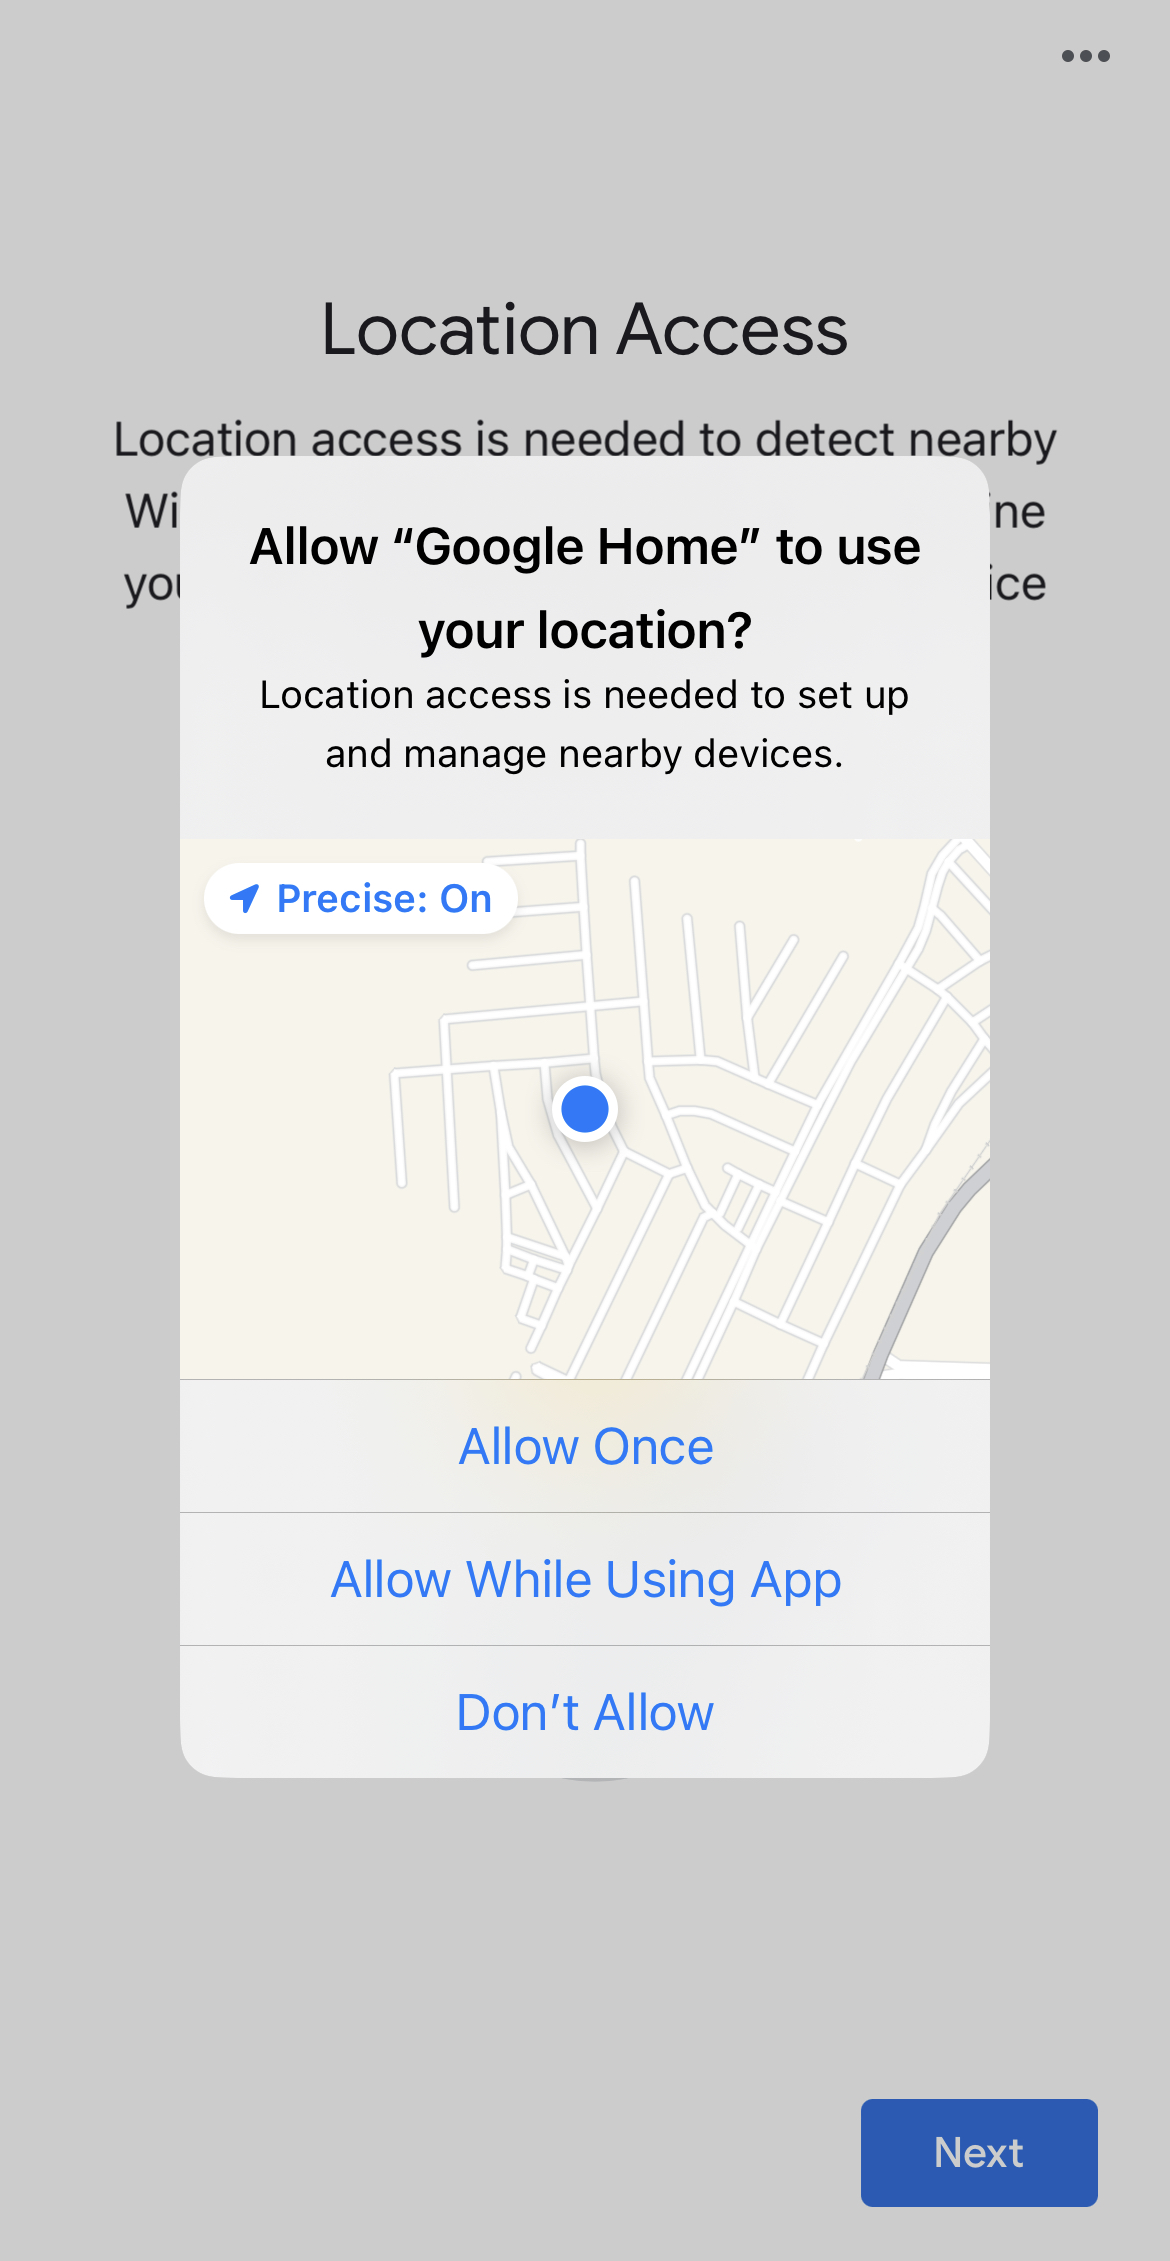 Allowing Google Home to access your location